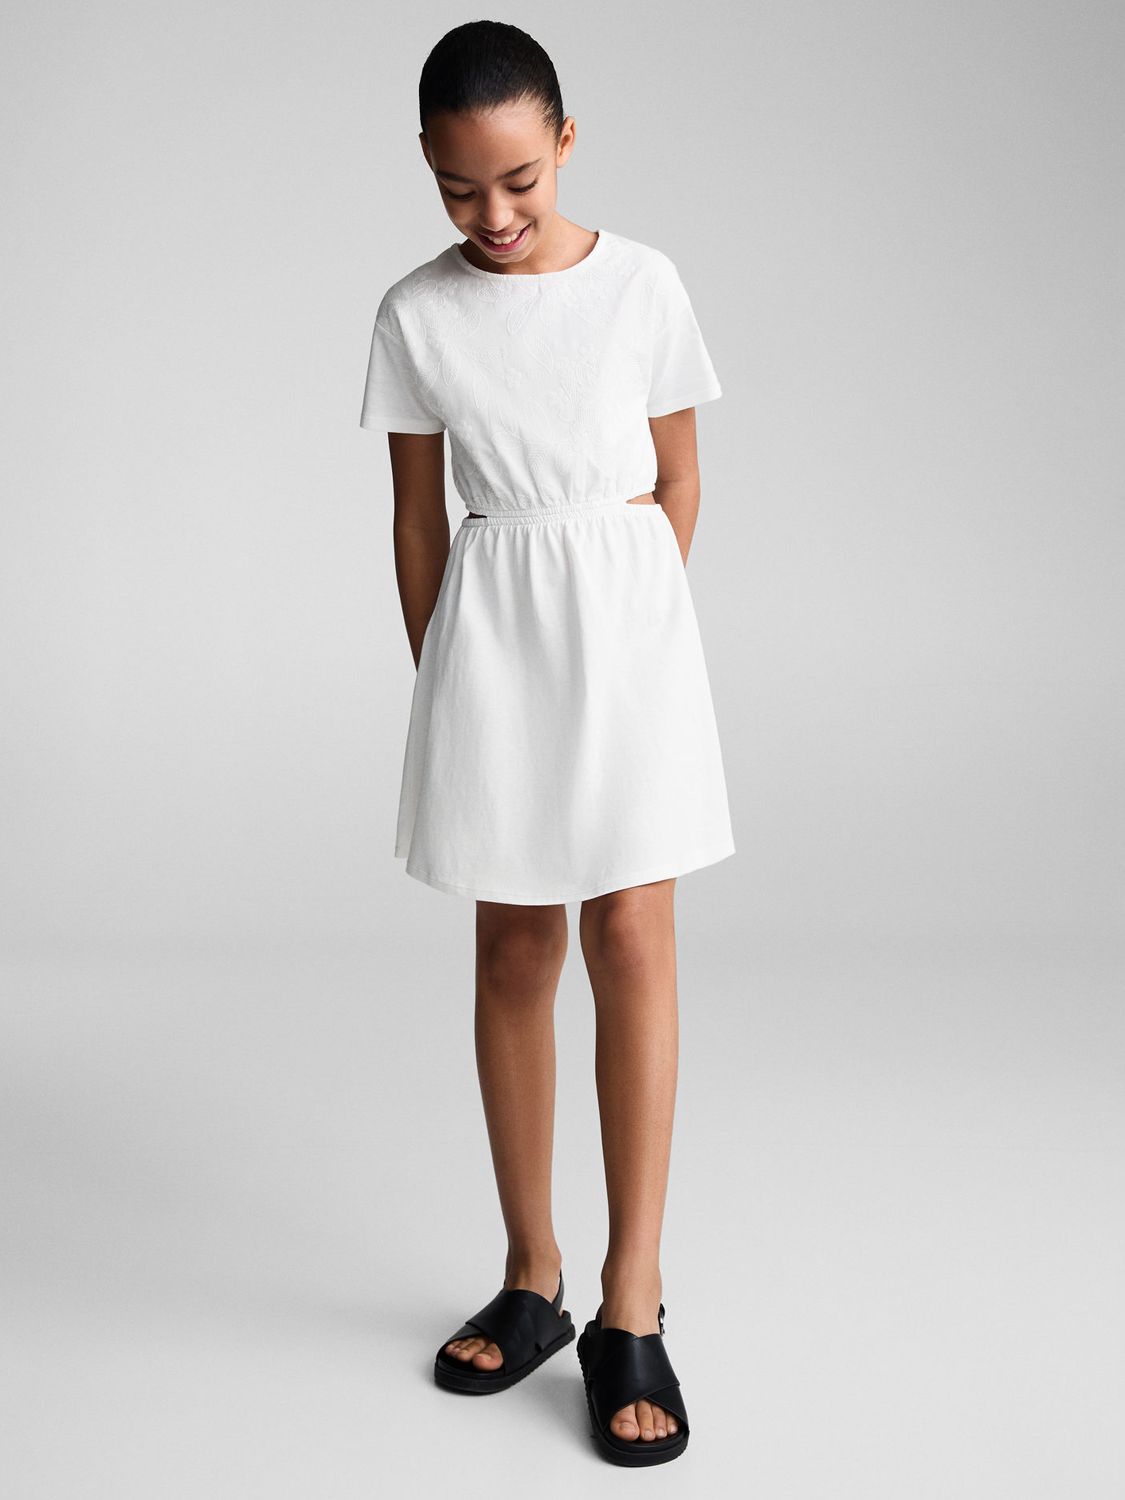 Mango Kids' Ona Floral Etched Cut Out Dress, Natural White, 11-12 years